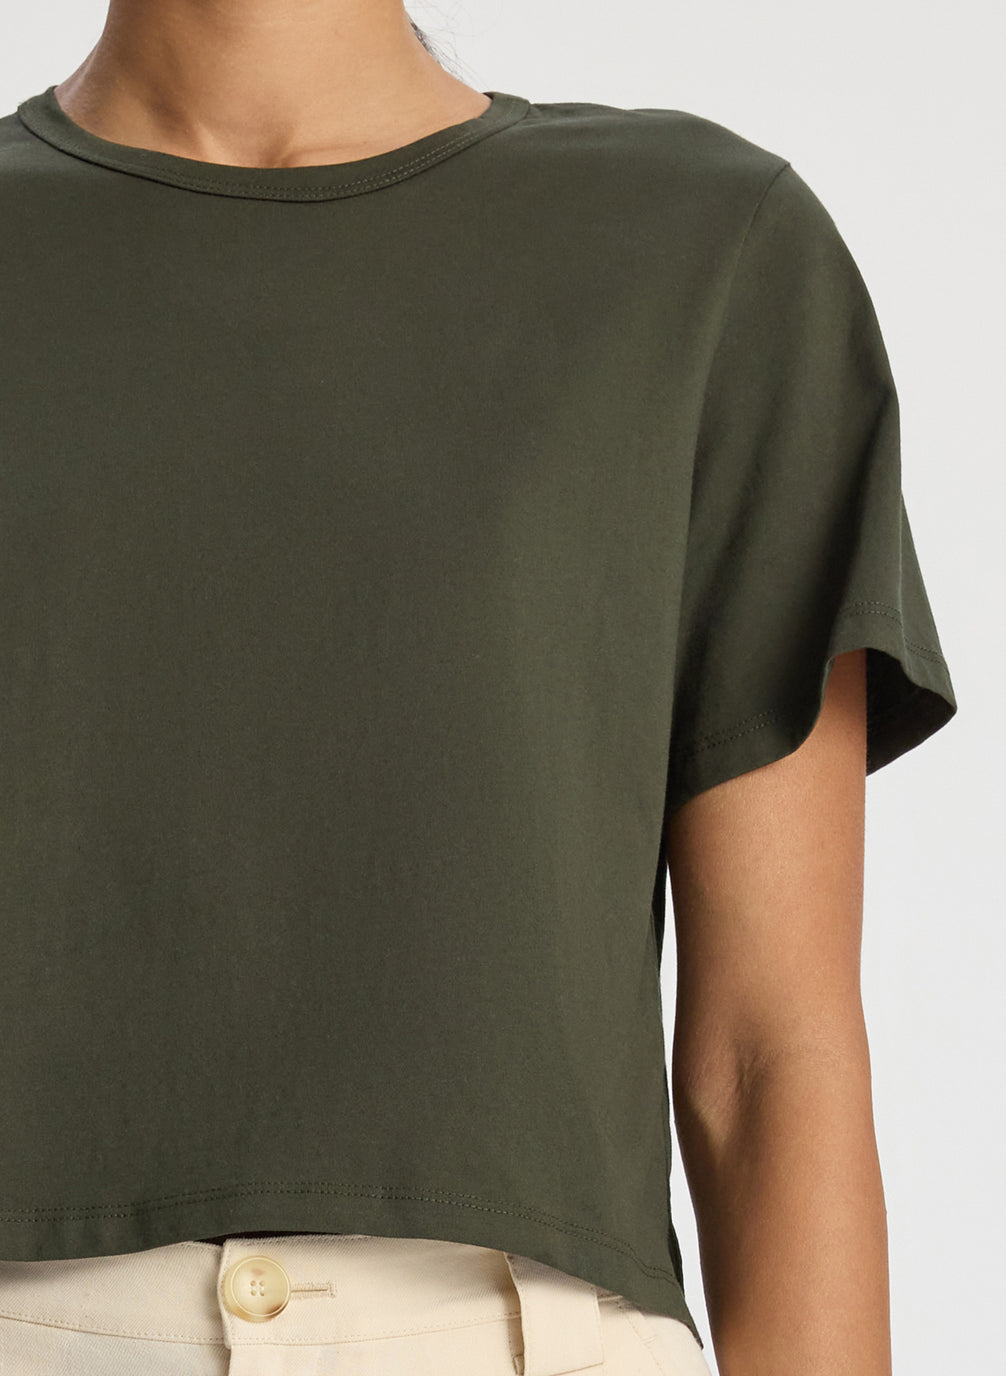 detail view of woman wearing olive green short sleeve tshirt and beige wide leg pants